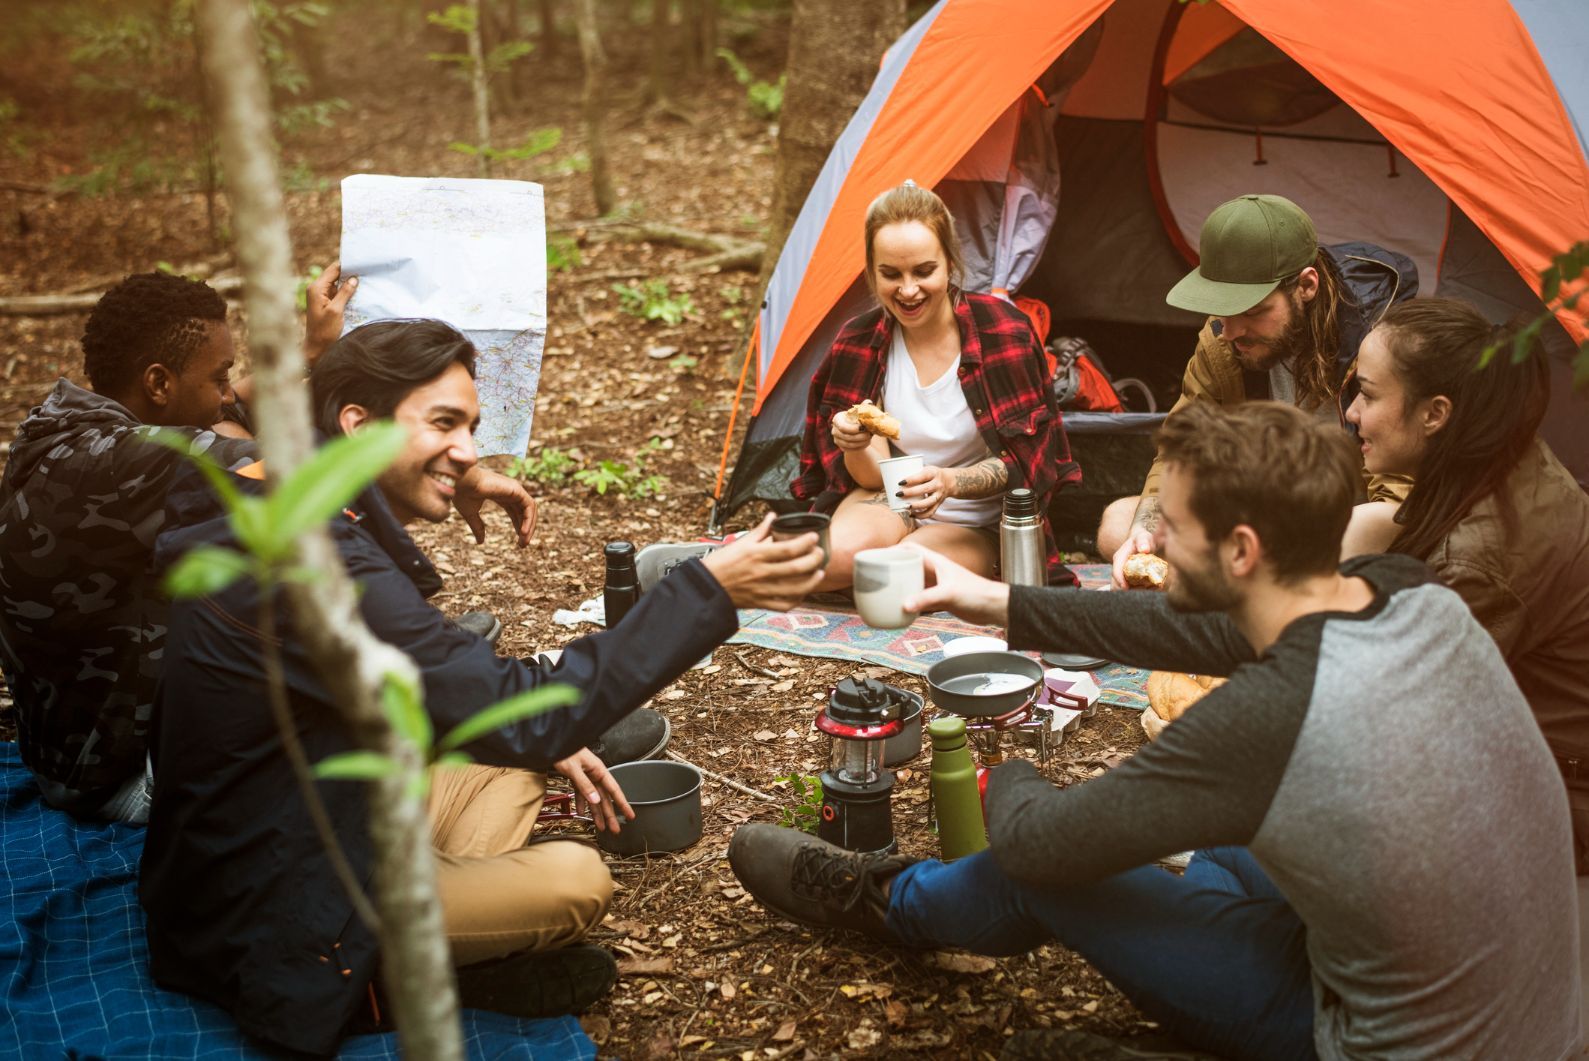 A group of campers toast drinks in a circle in a forest.